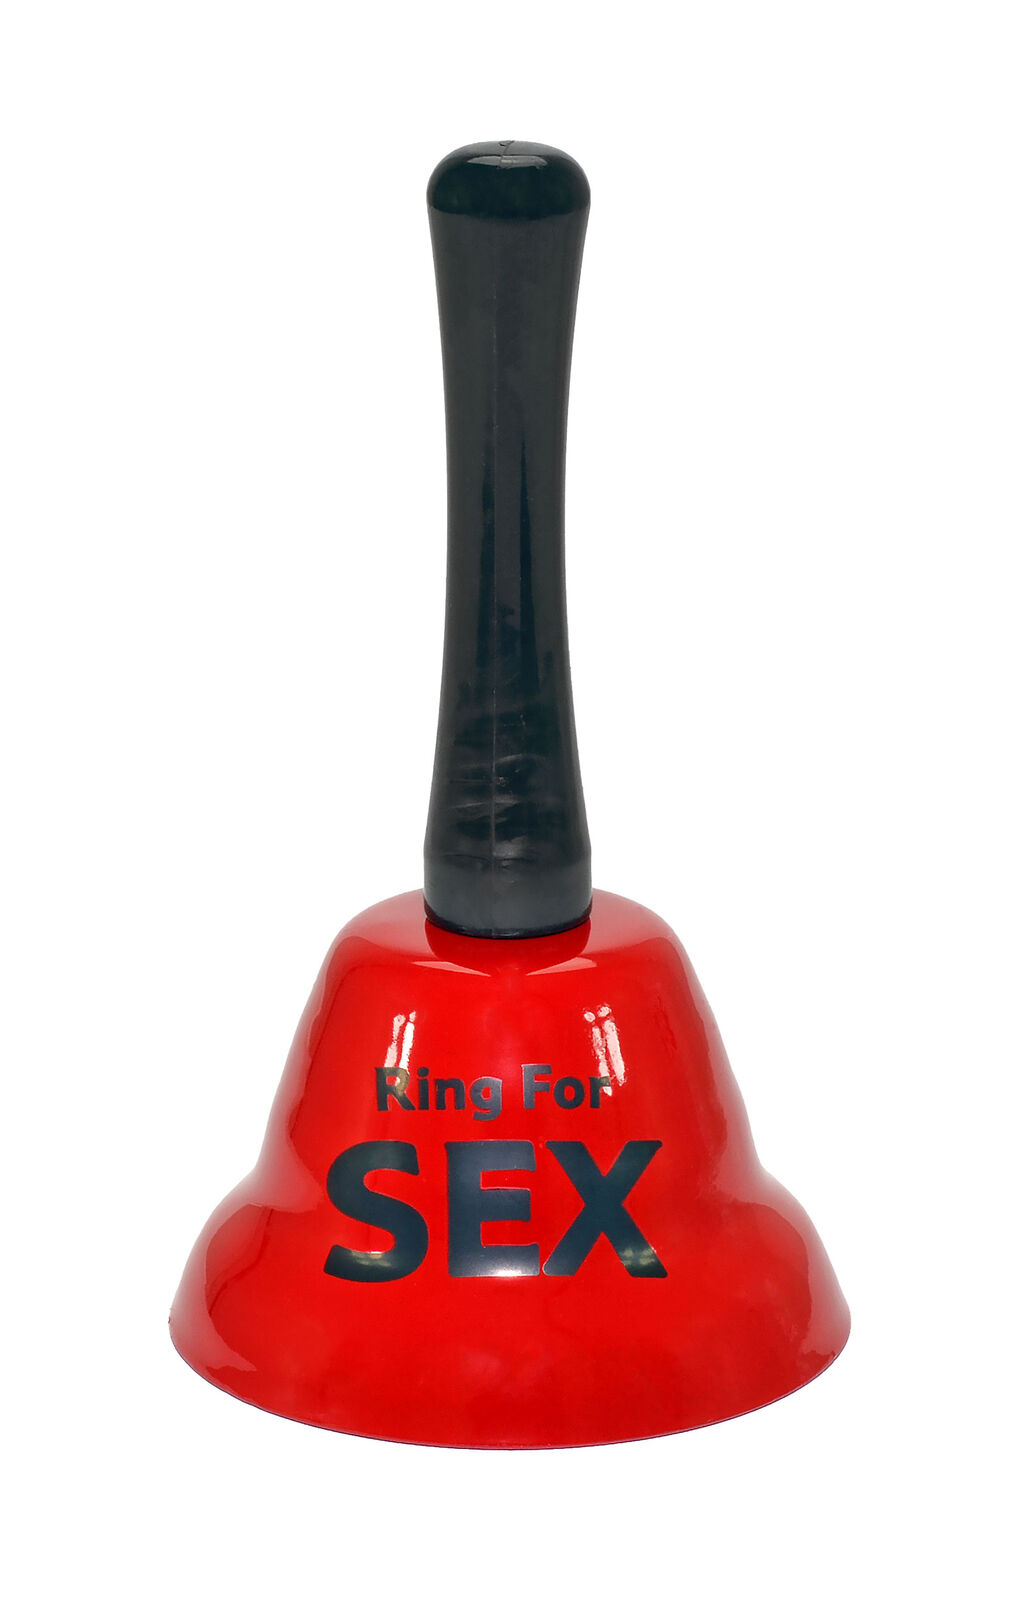 Ring for Sex Novelty Hand Bell Funny Raunchy Gag Gift White Elephant Christmas